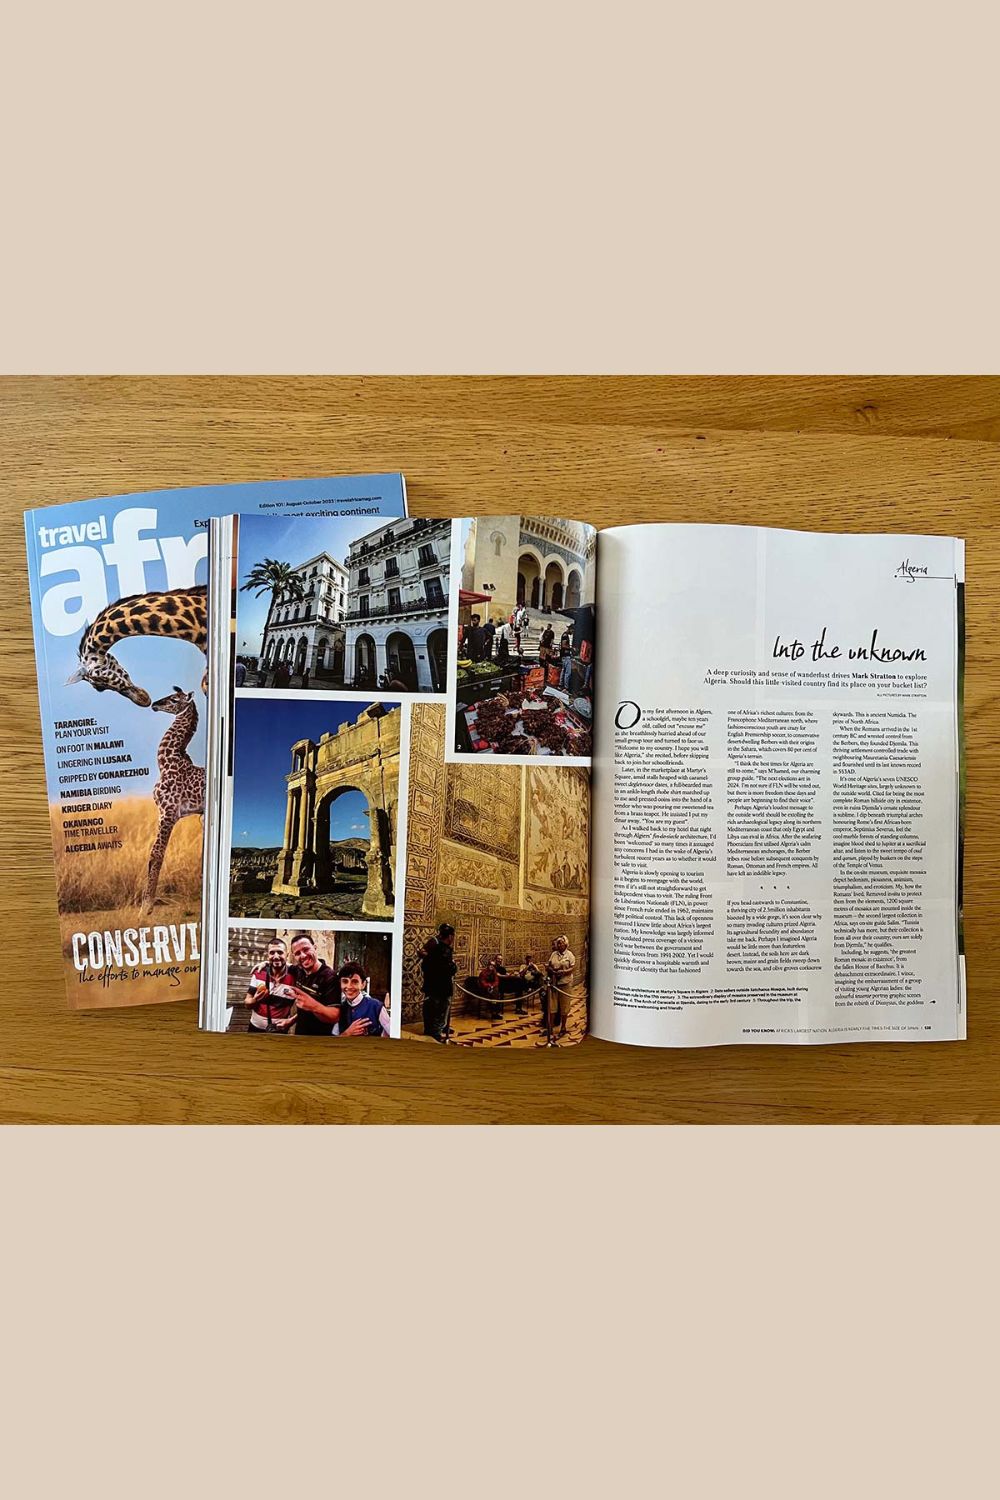 Travel Africa Issue 101